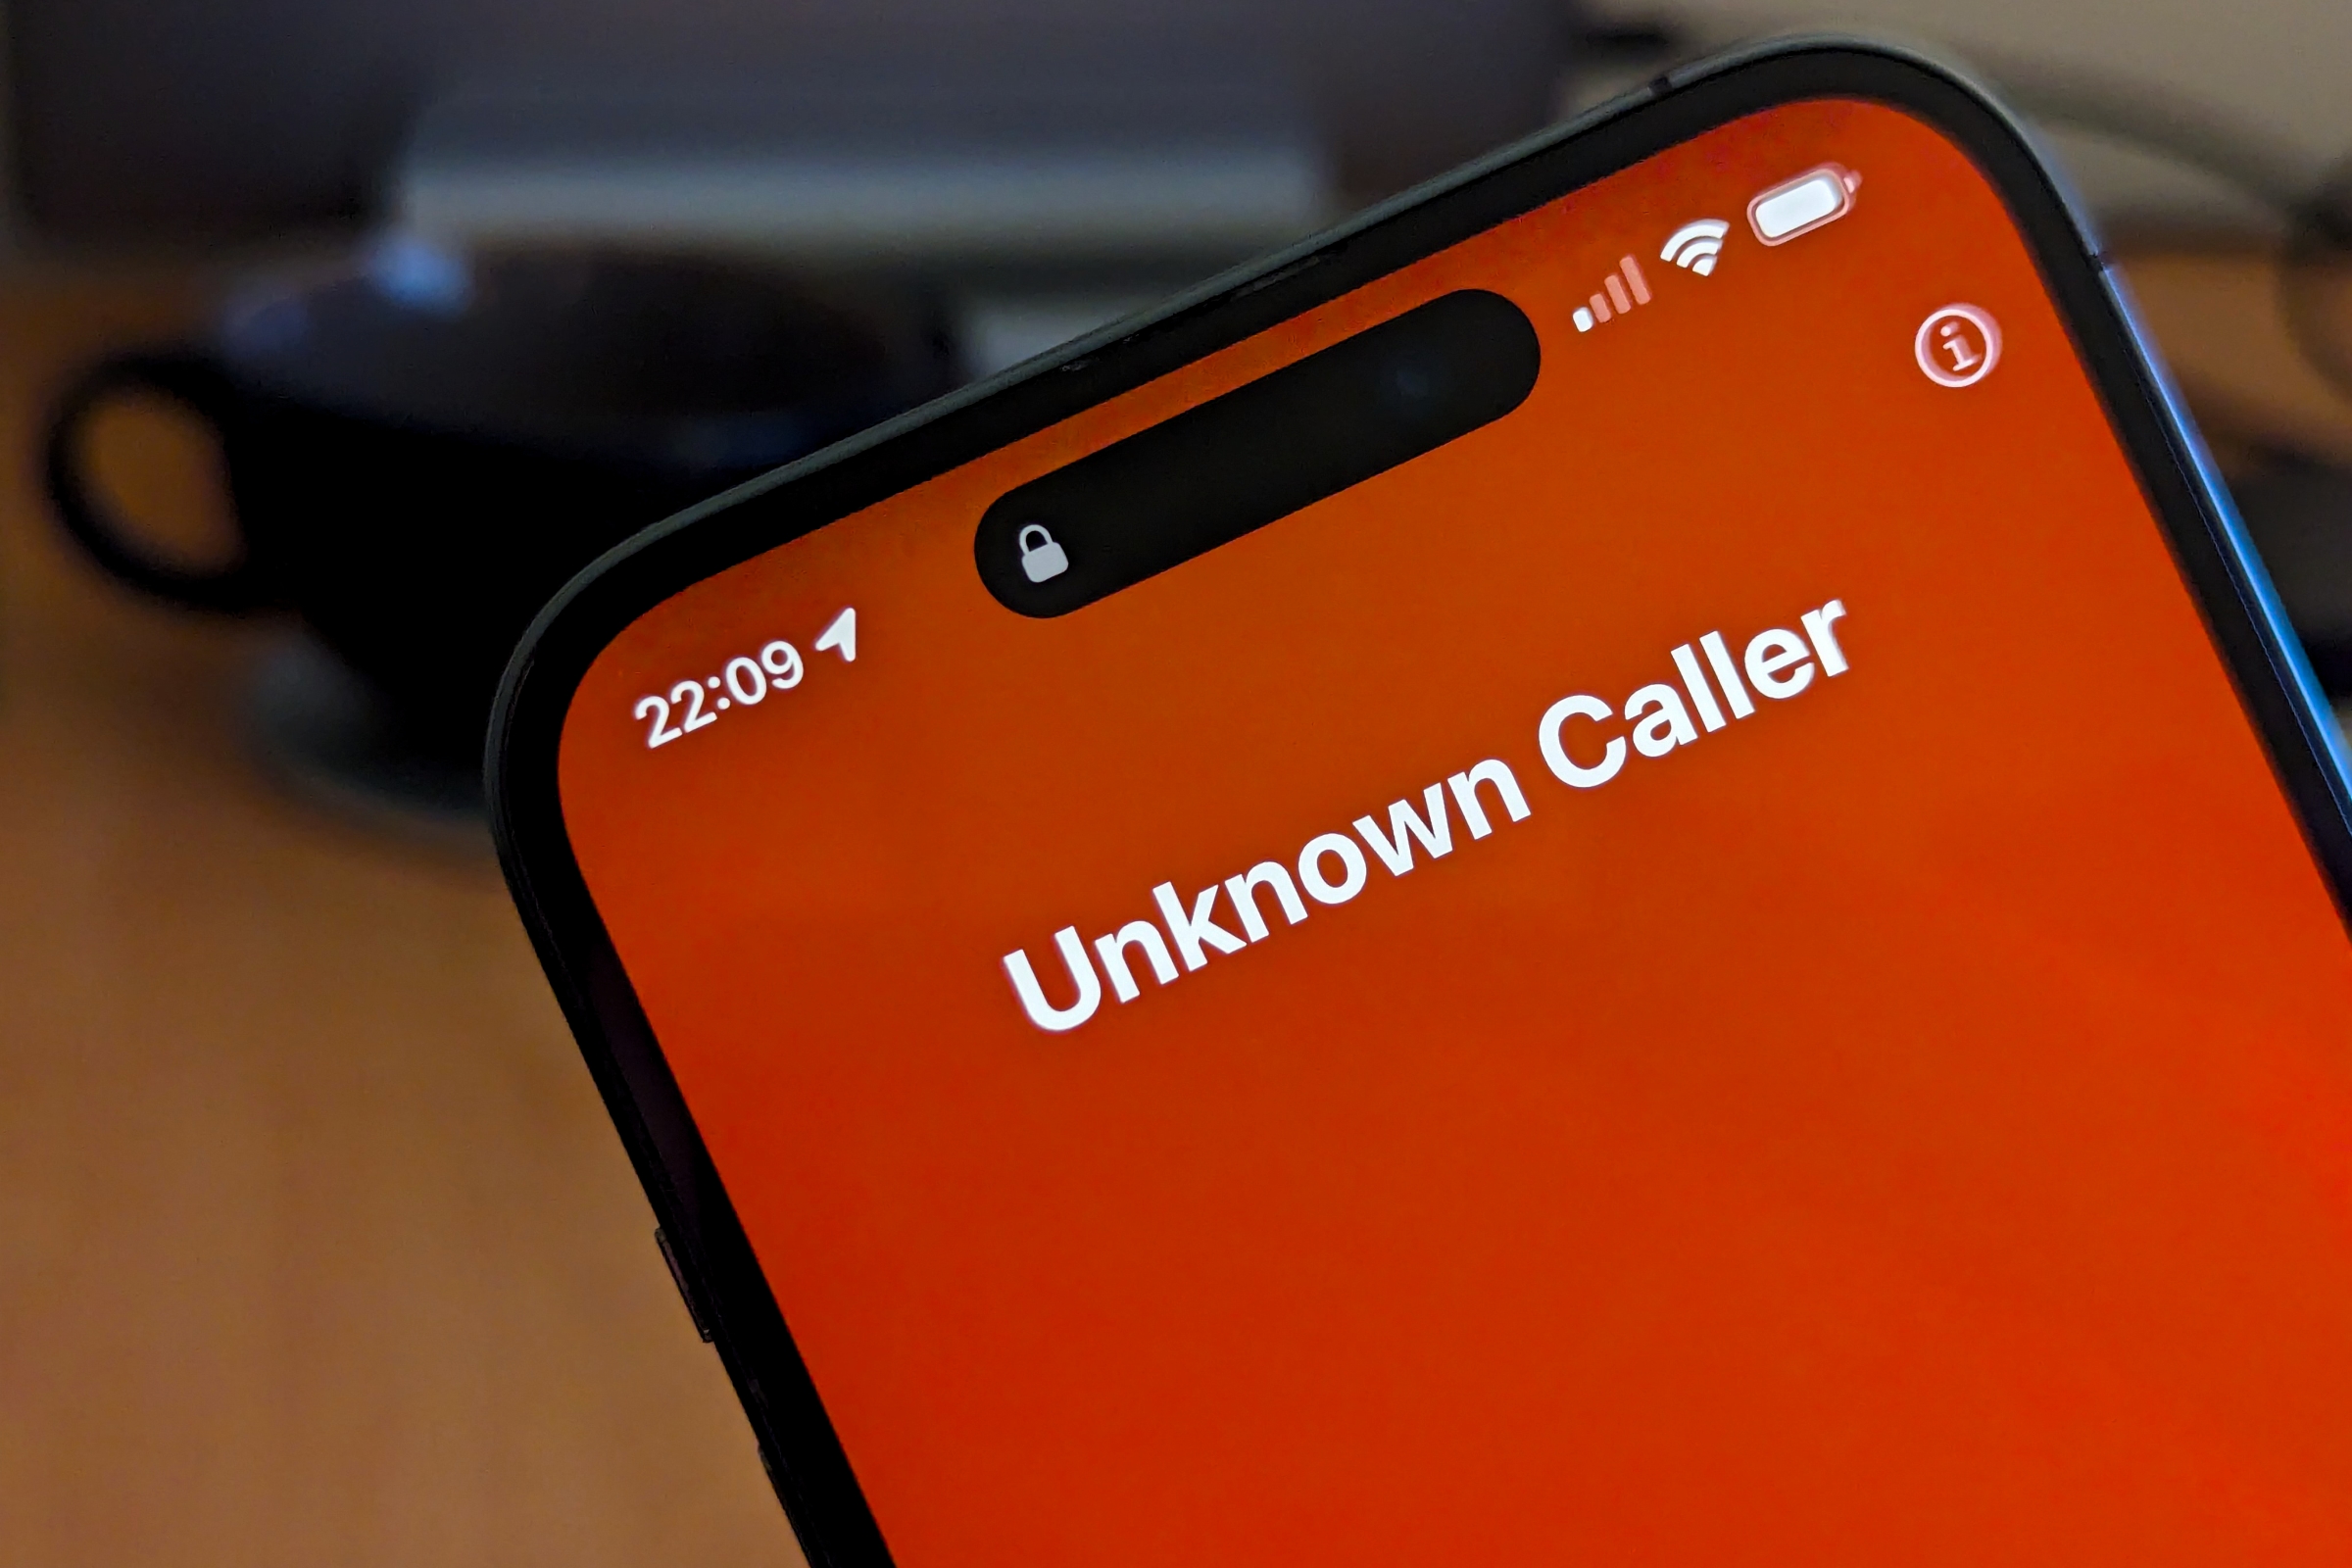 02045996875: Exploring the Depths of an Unknown Caller